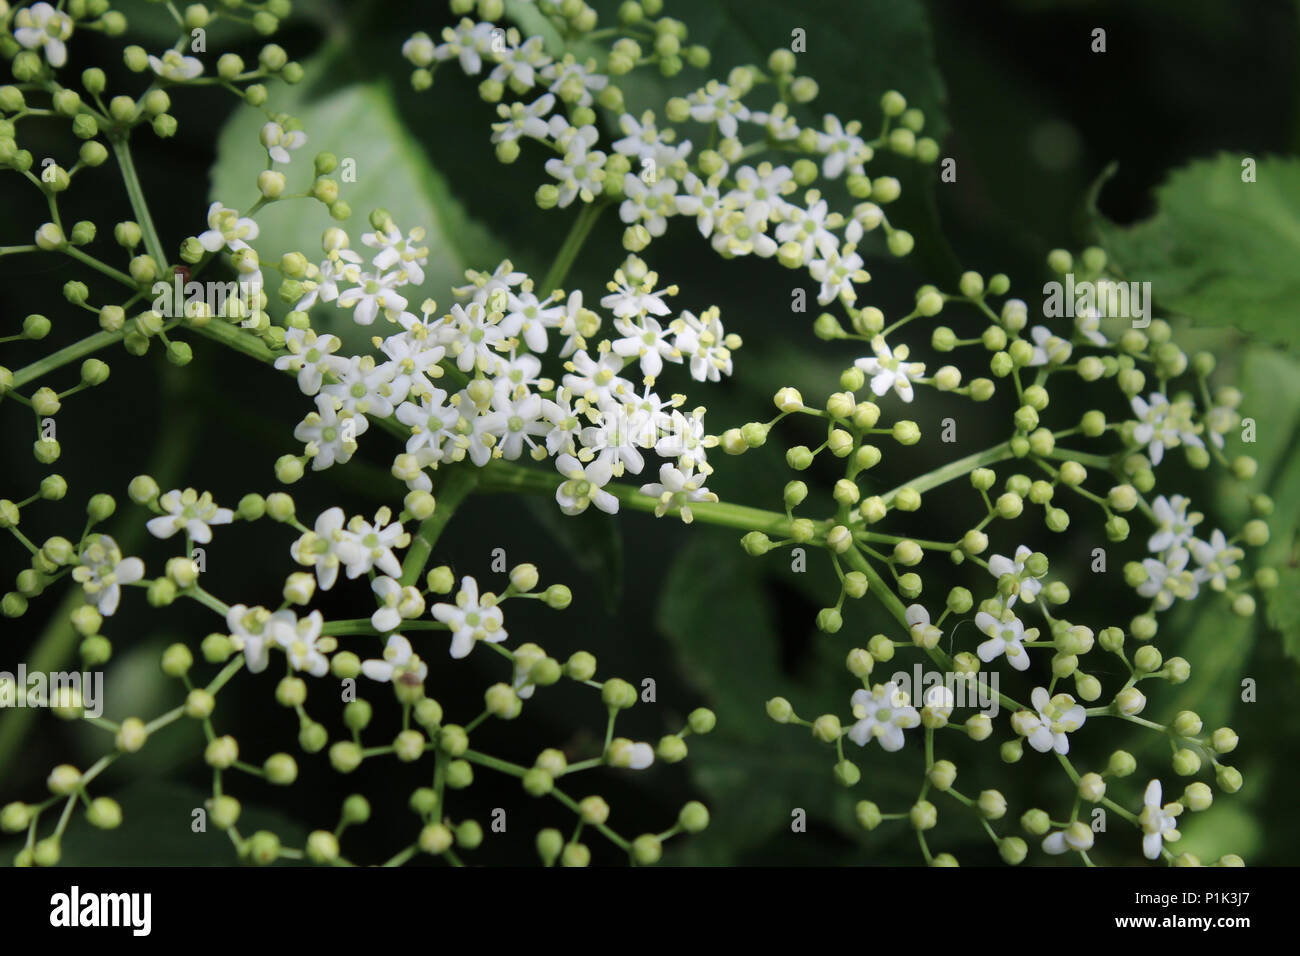 Geometric patterns in nature. The beautiful white flowers and buds of an Elderberry plant (Sambucus). Stock Photo